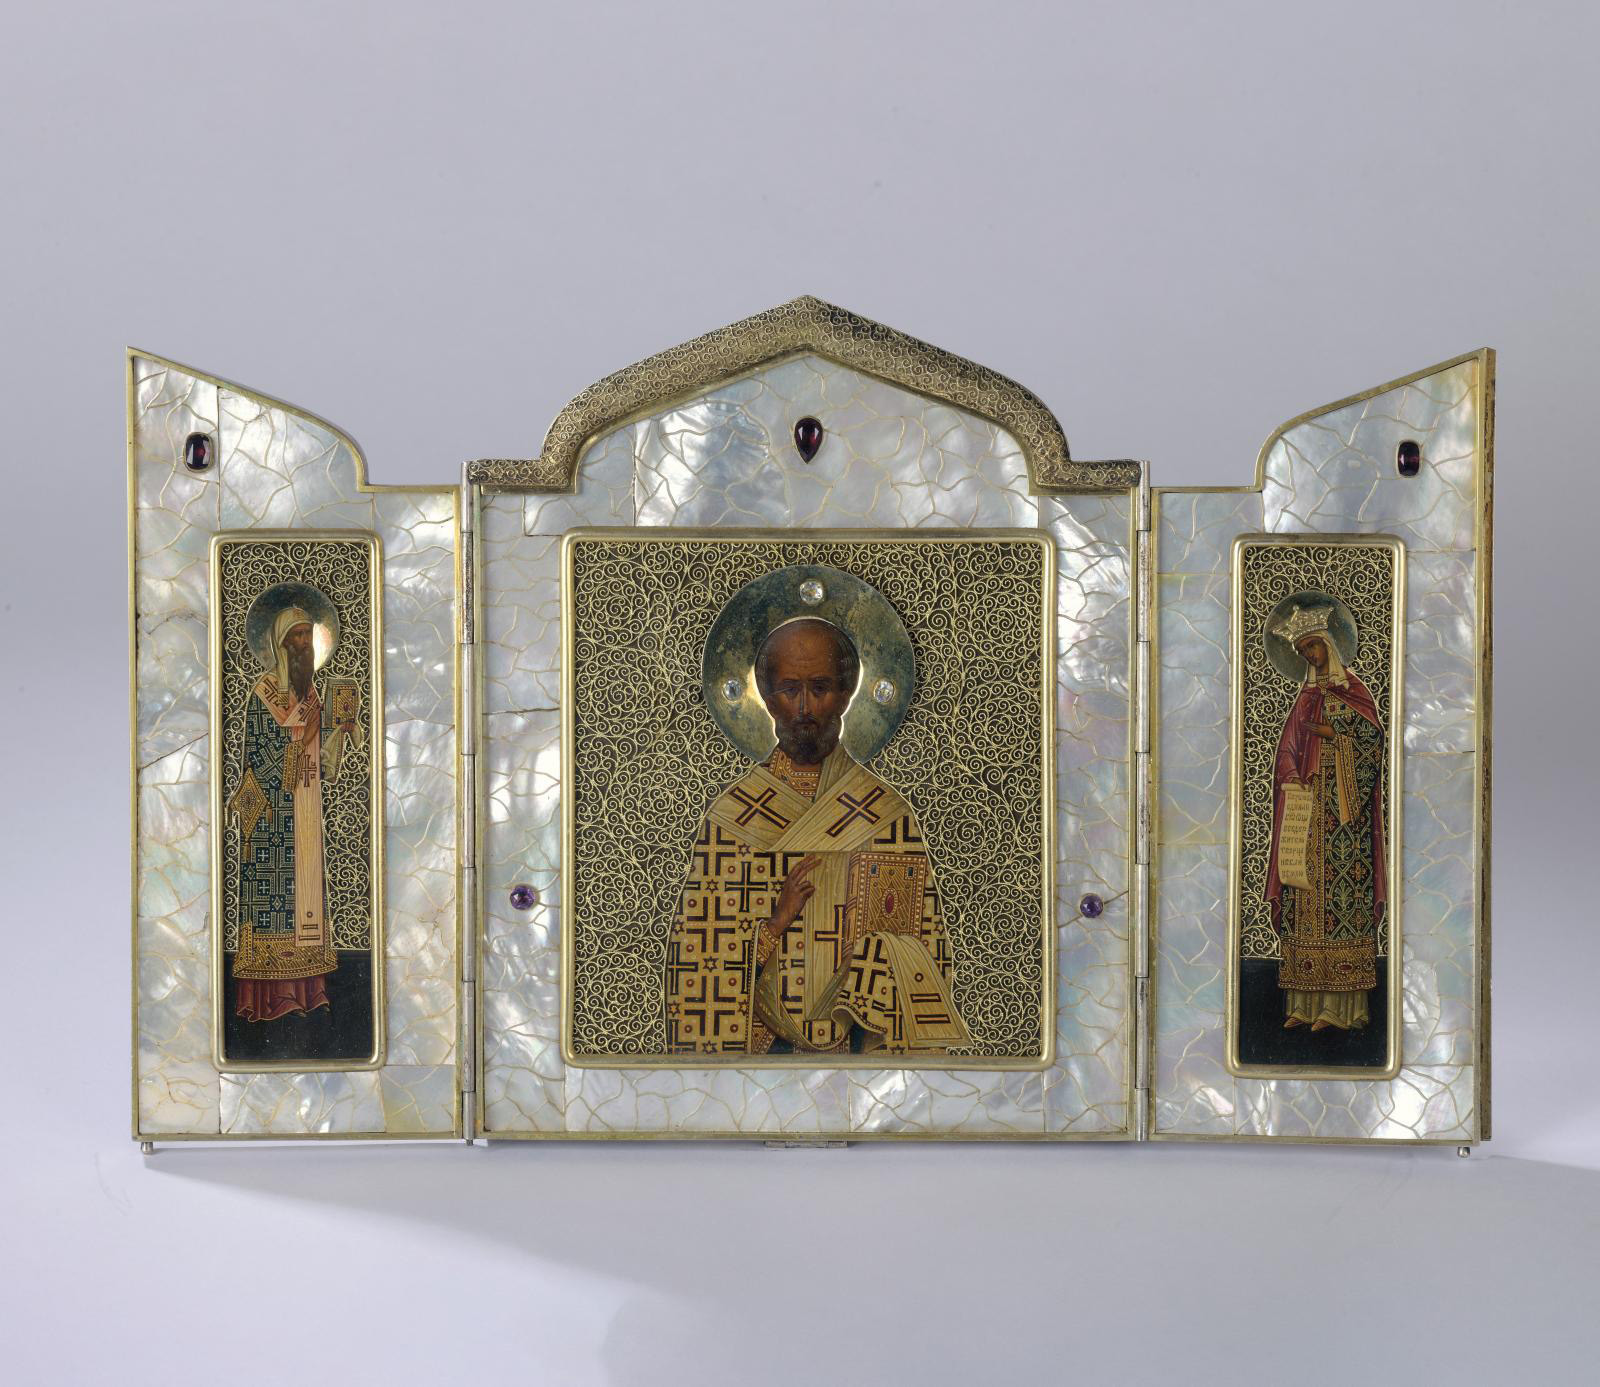 Moscow, 1908-1917, Kuzma Konov, probably for Olovyanishnikov & Sons. Imperial Icon, silver gilt and mother-of-pearl triptych depicting St.